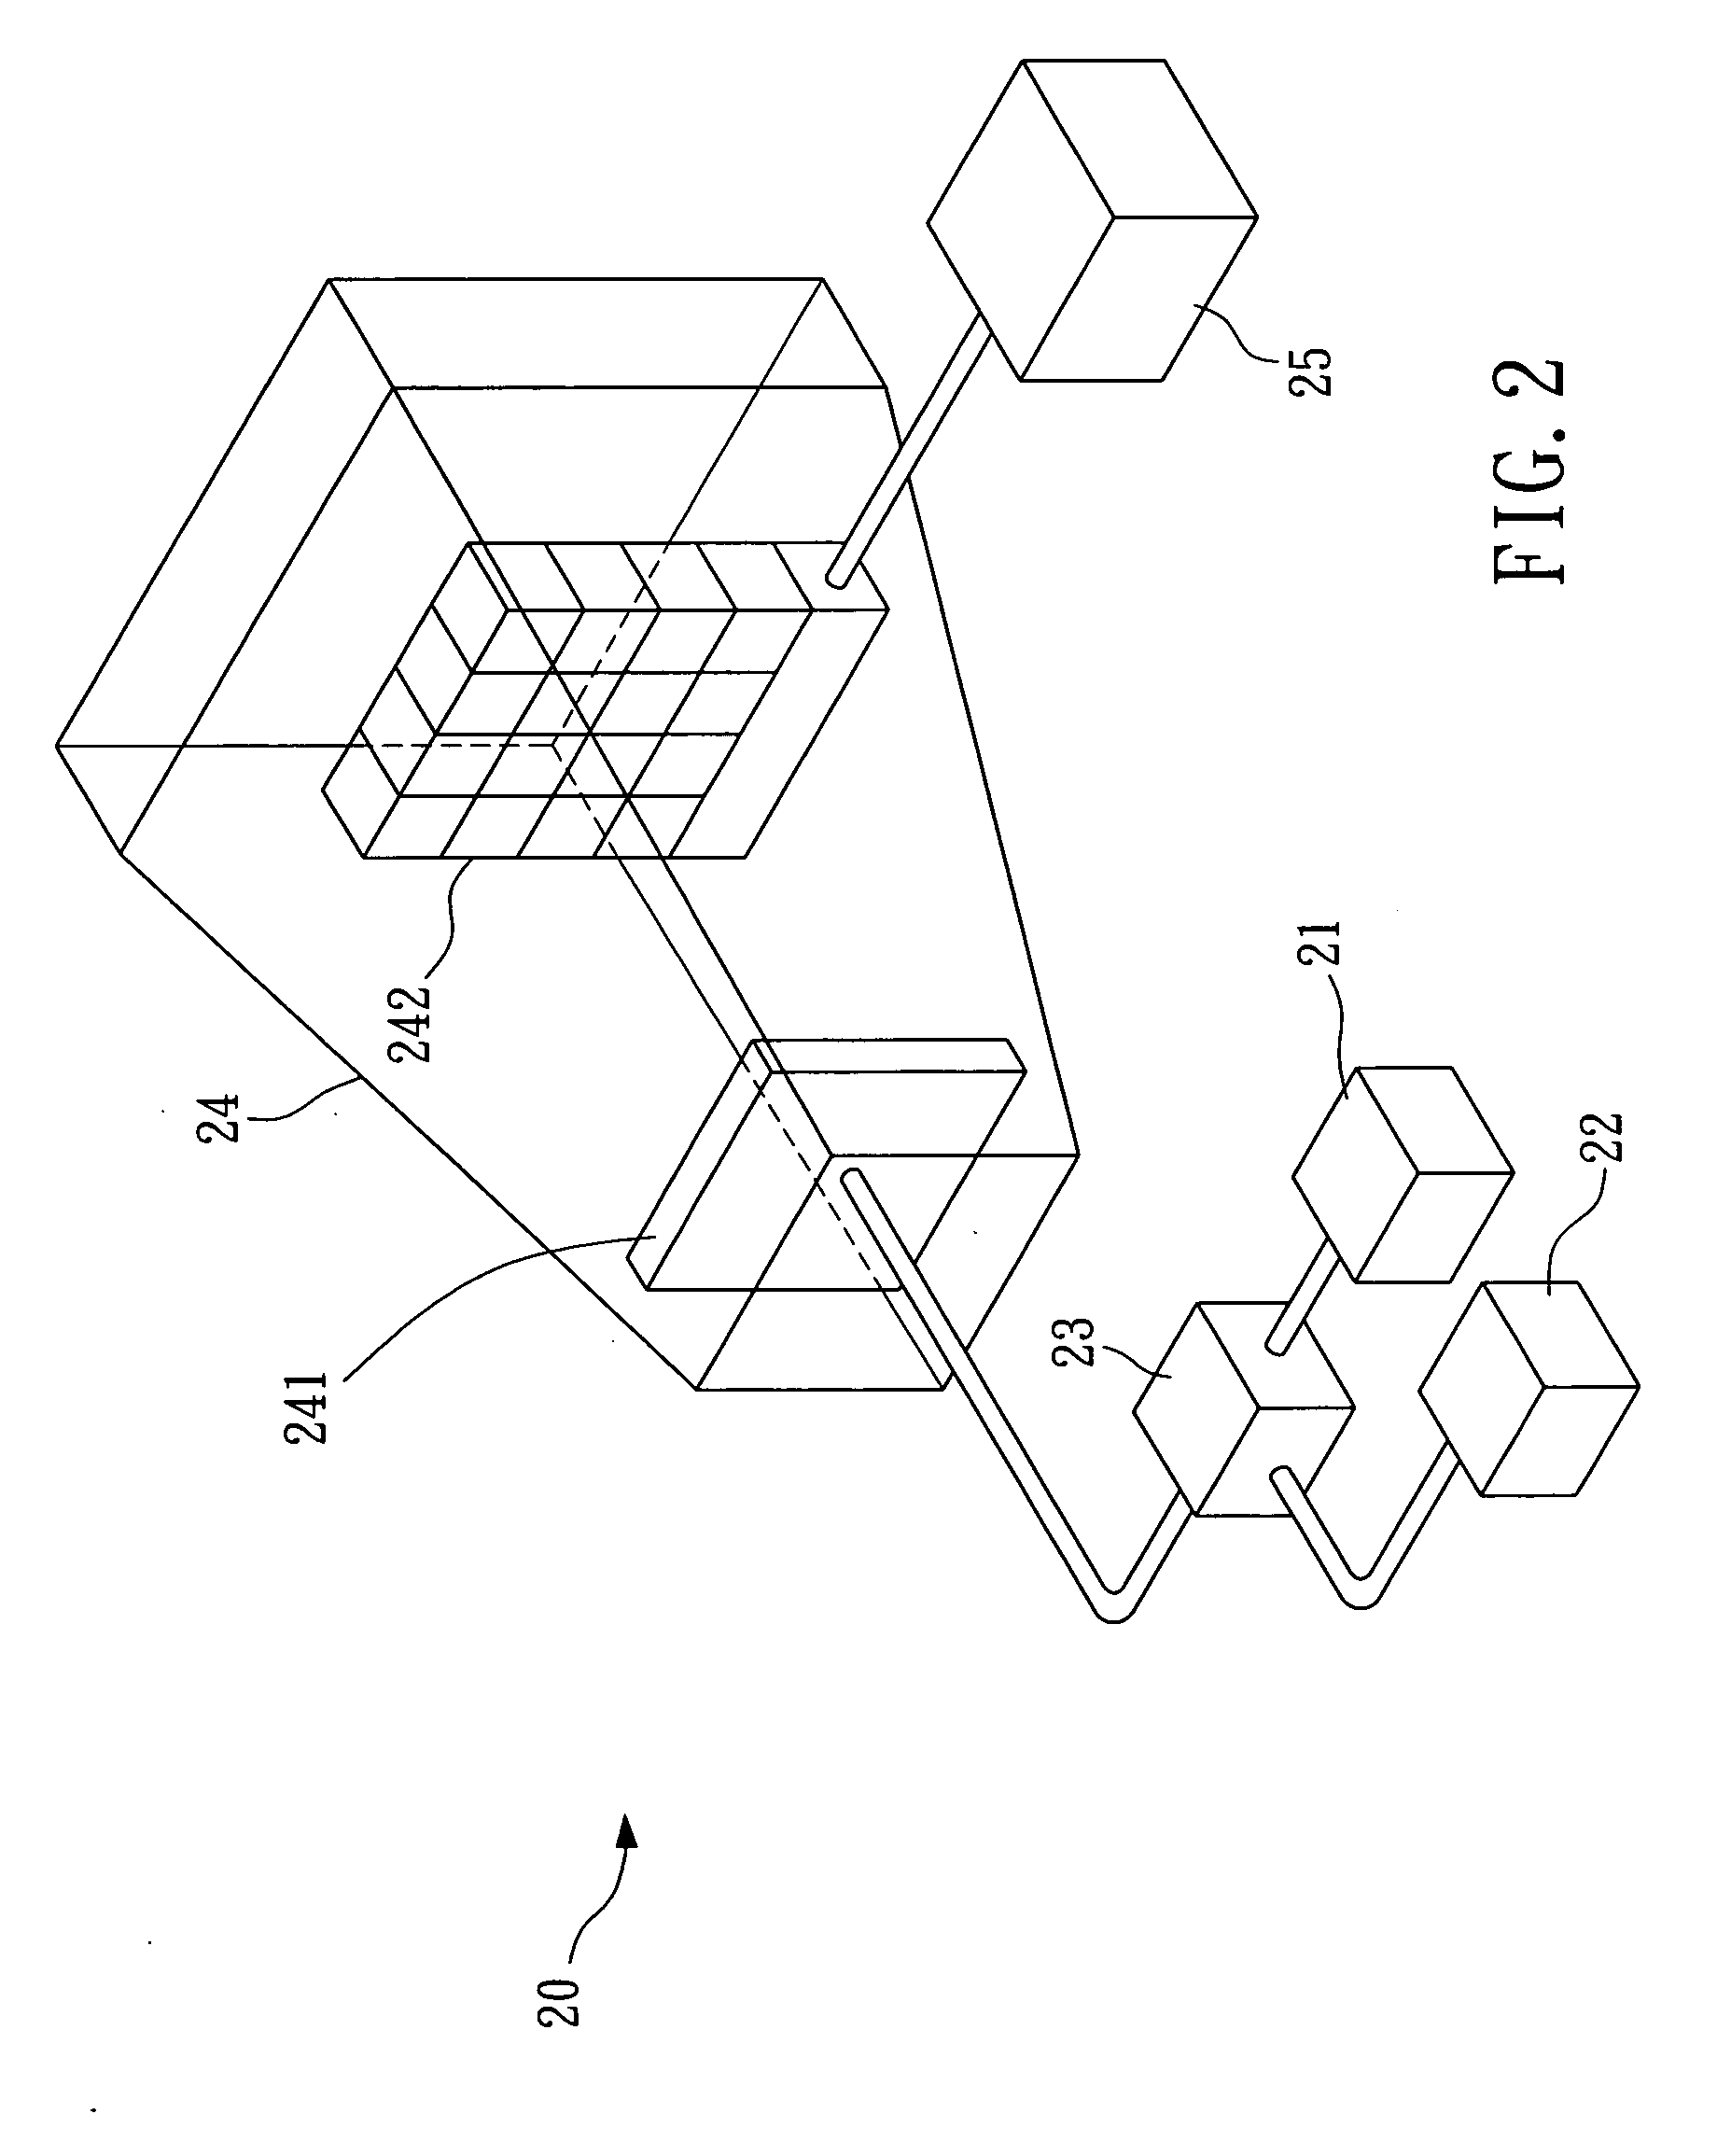 Batch testing system and method for wireless communication devices